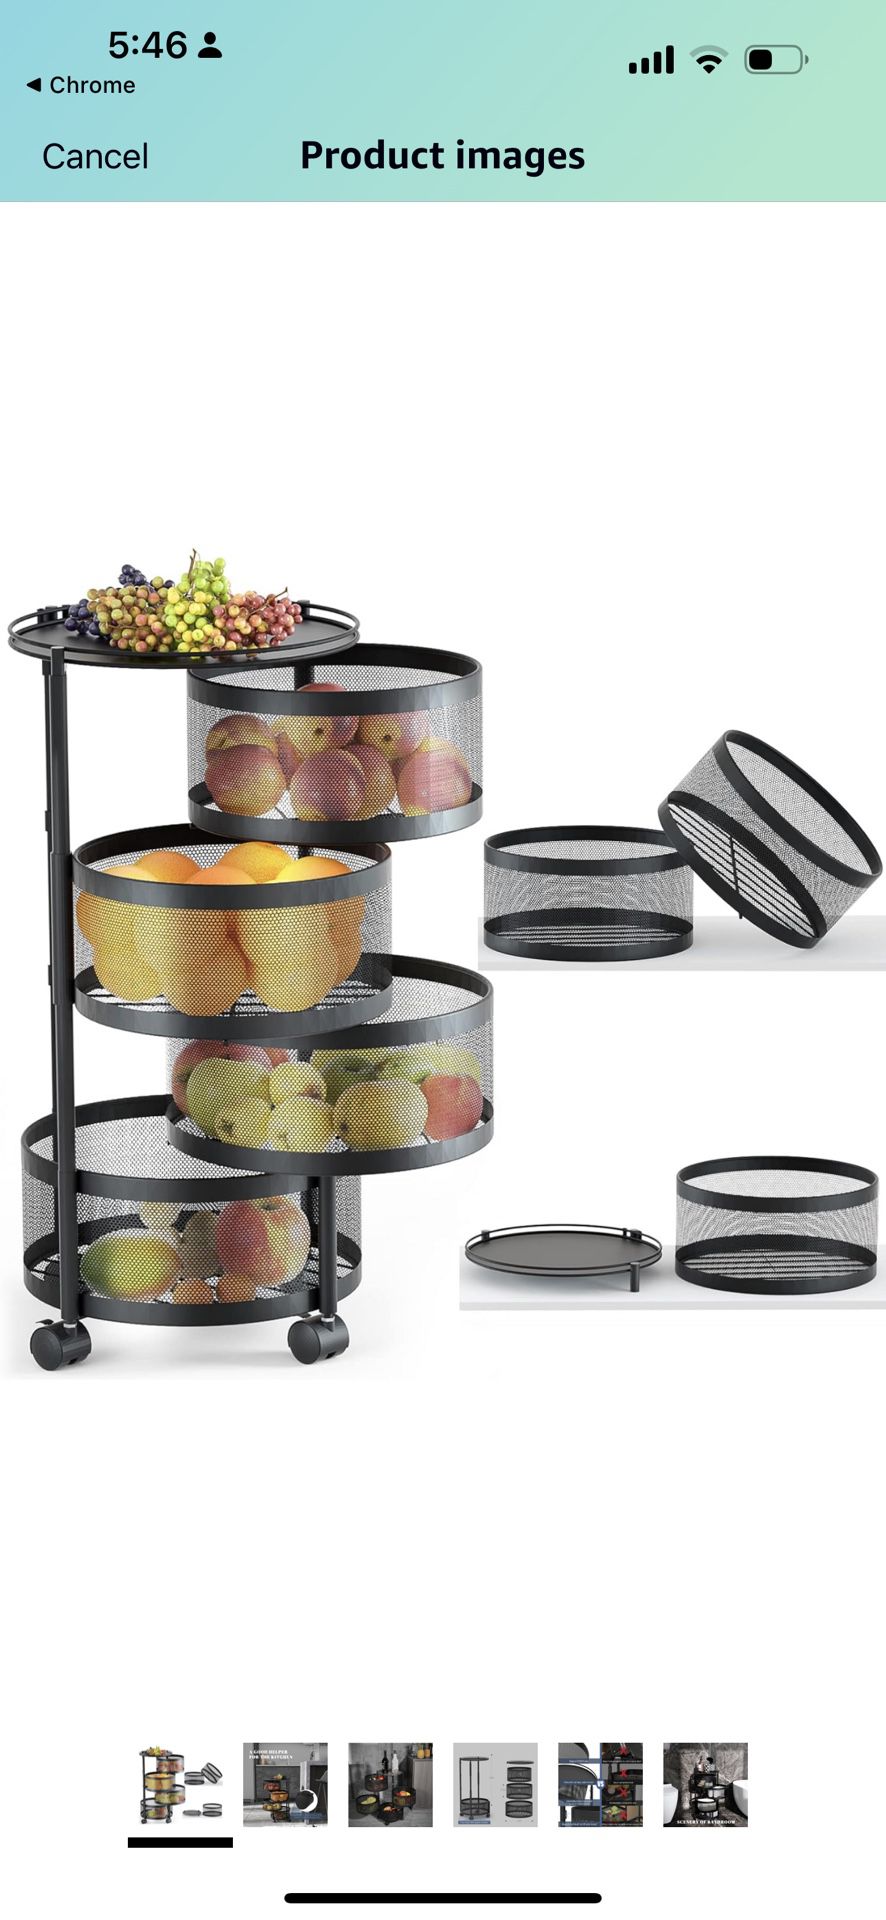 Rotating Storage Rack for Kitchen, 4 Tier Fruit and Vegetable Storage for Kitchen Rotating Storage Rack with Wheels,Kitchen Storage Cart Space Saver P